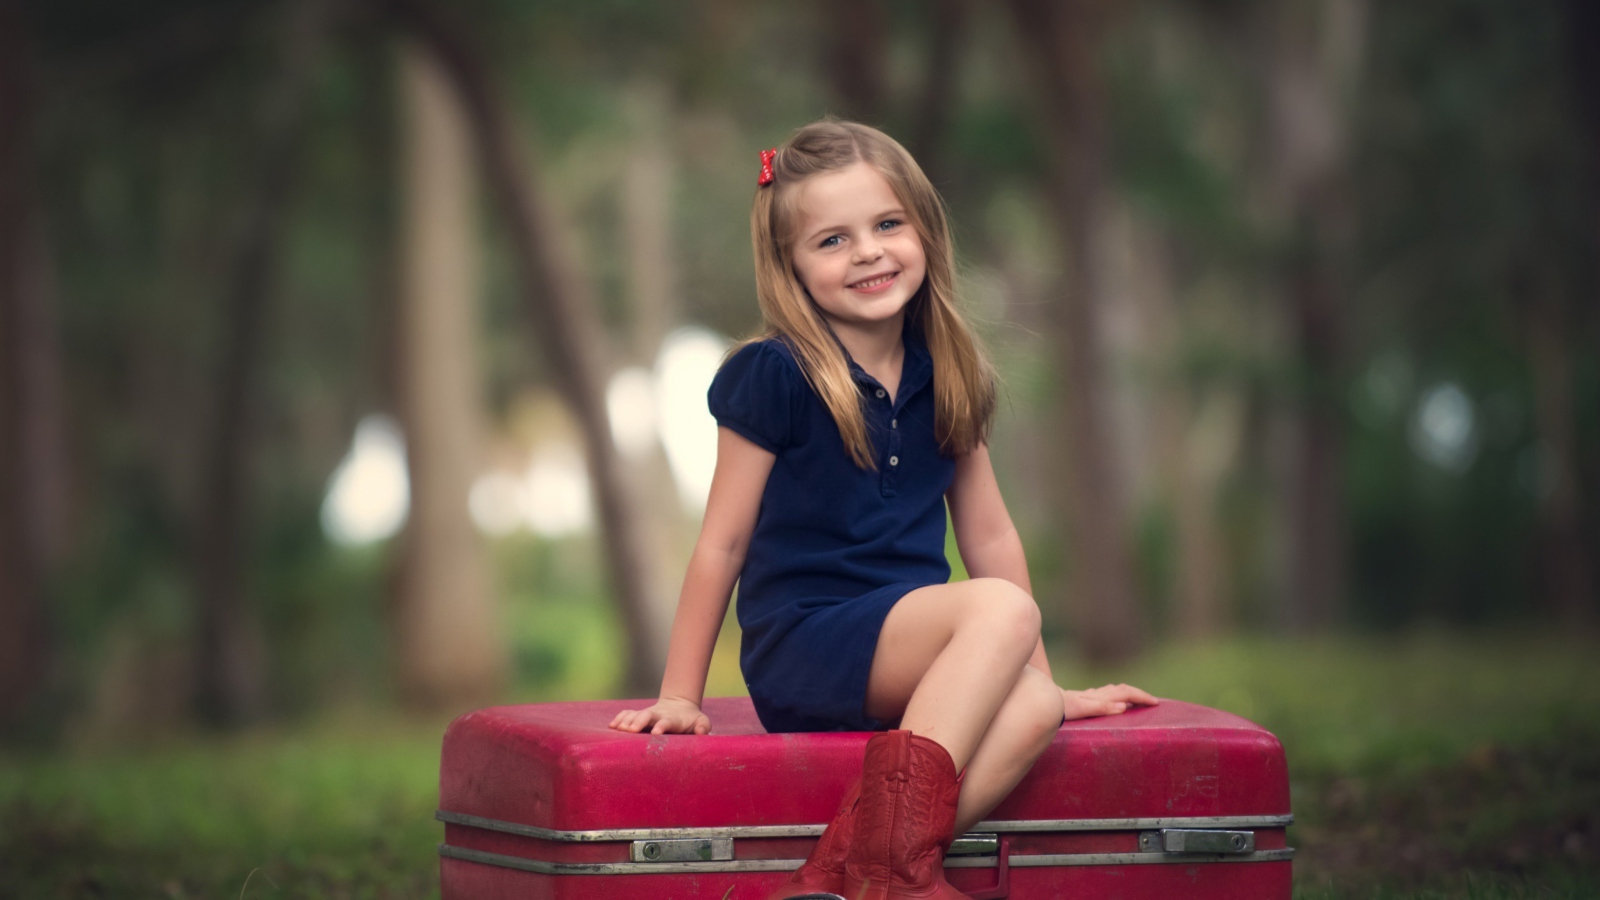 Little Girl Sitting On Red Suitcase wallpaper 1600x900